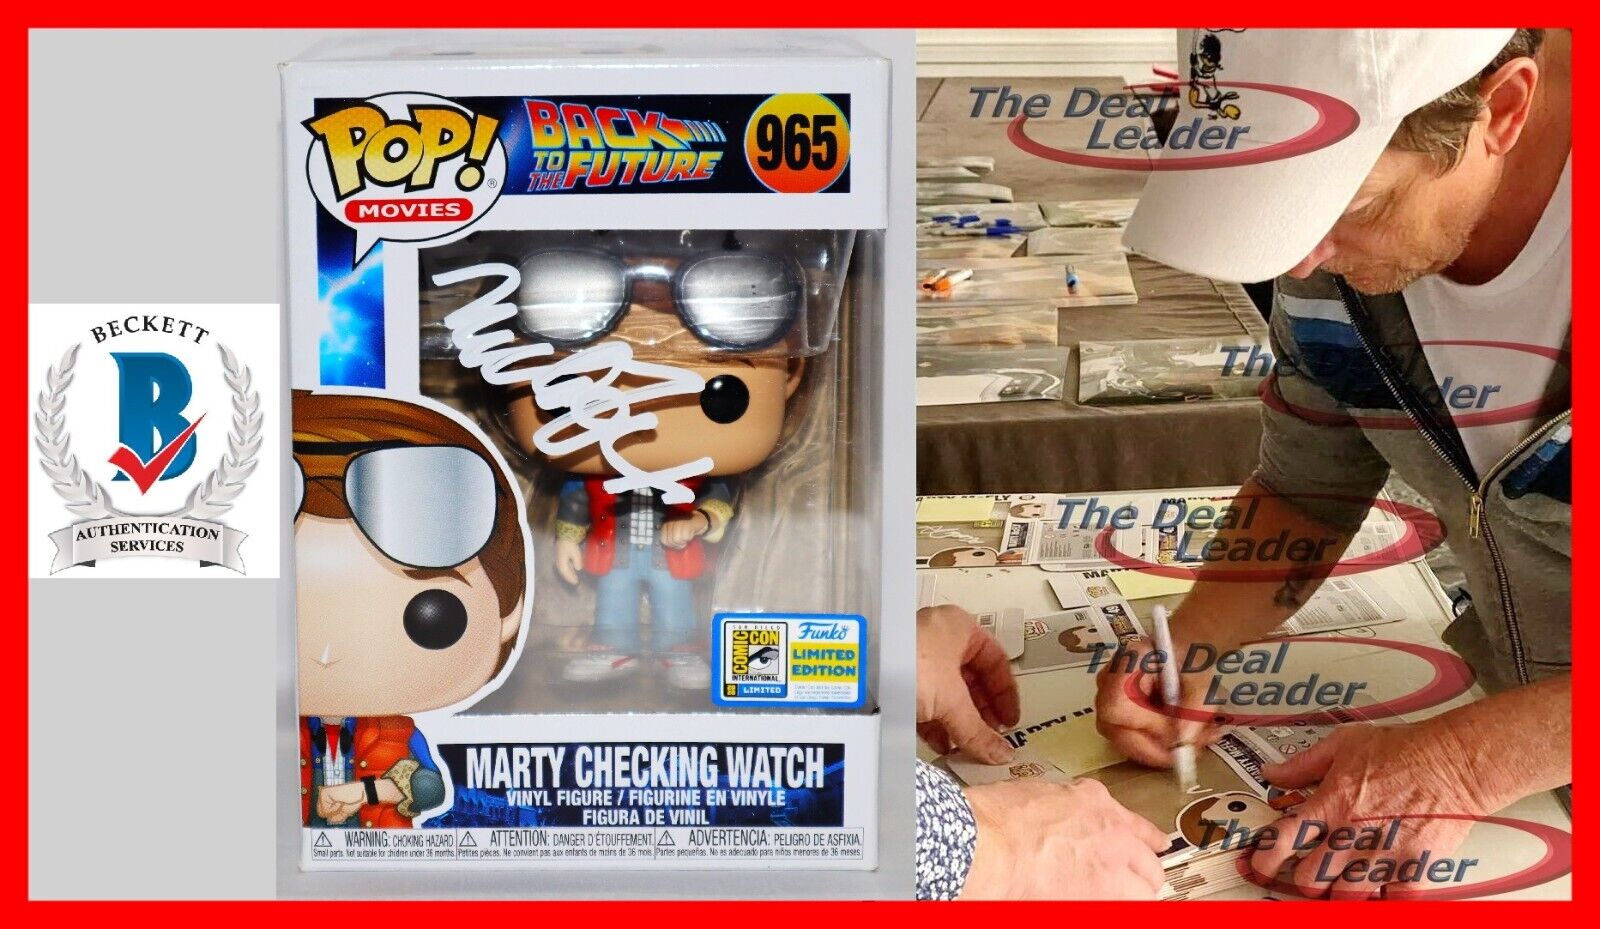 Michael J Fox Signed Marty Checking Watch Back To Future Funko 965 POP Beckett